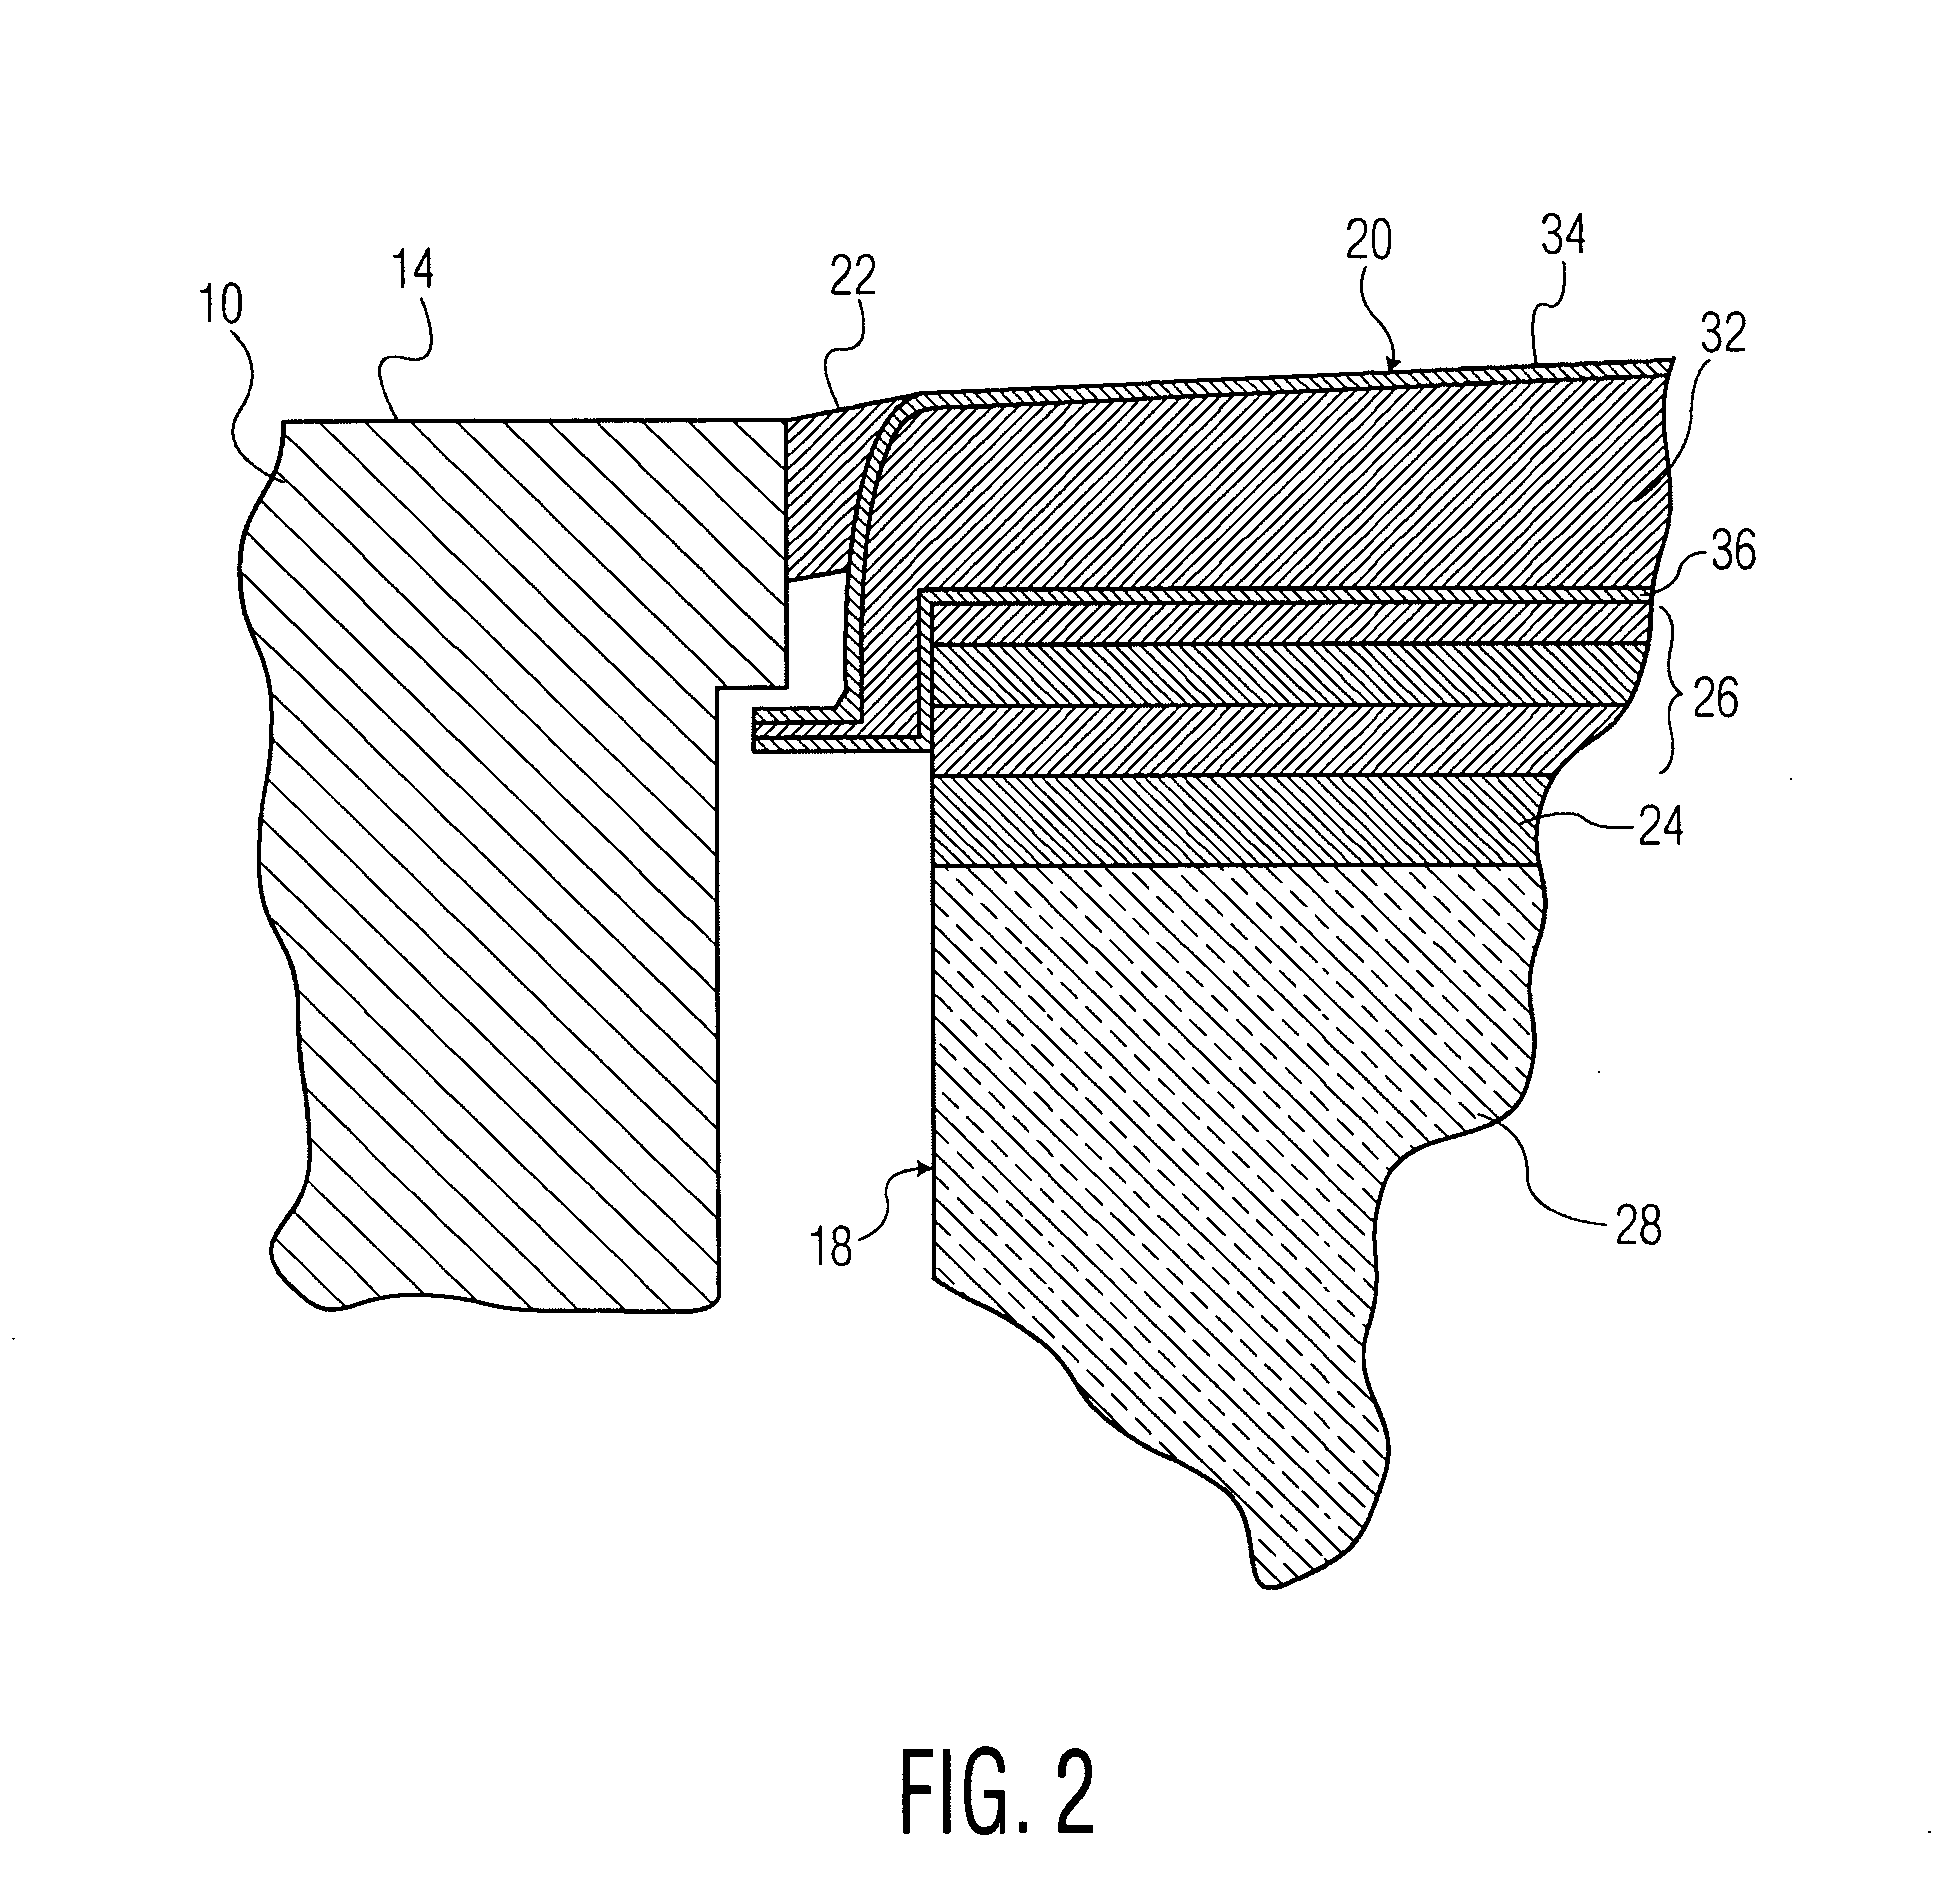 Transducer assembly for ultrasound probes